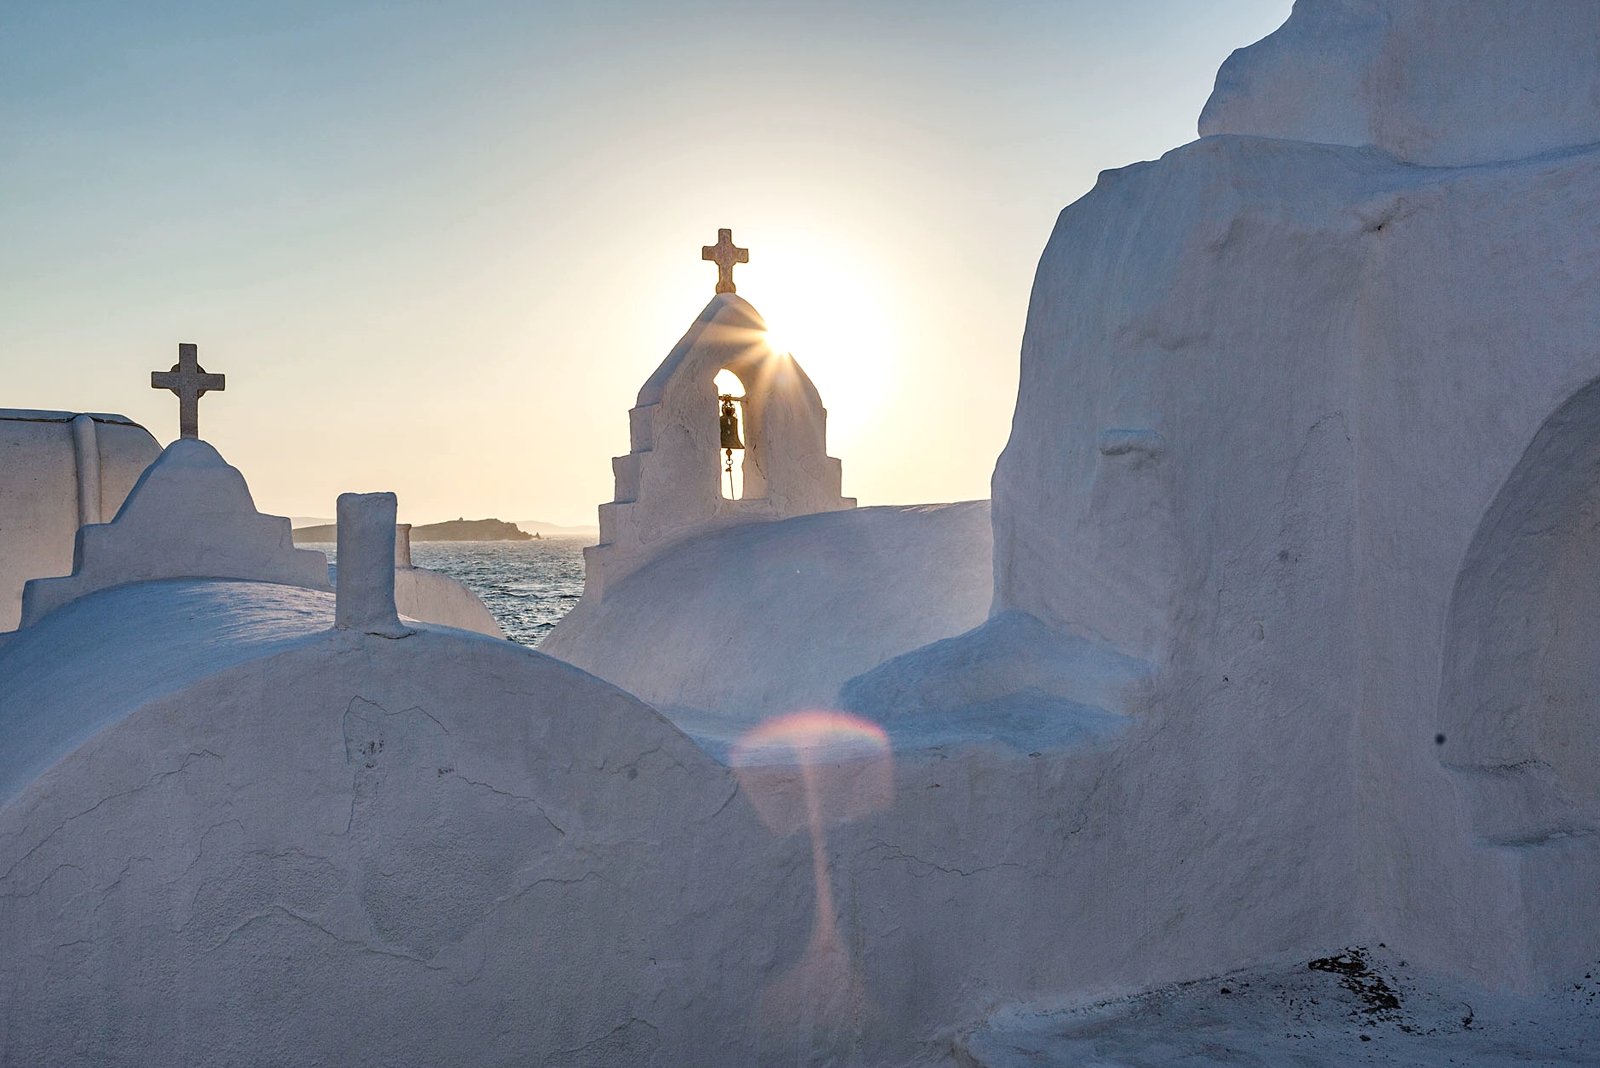 How to ring the bell of the Panagia Paraportiani Church on Mykonos